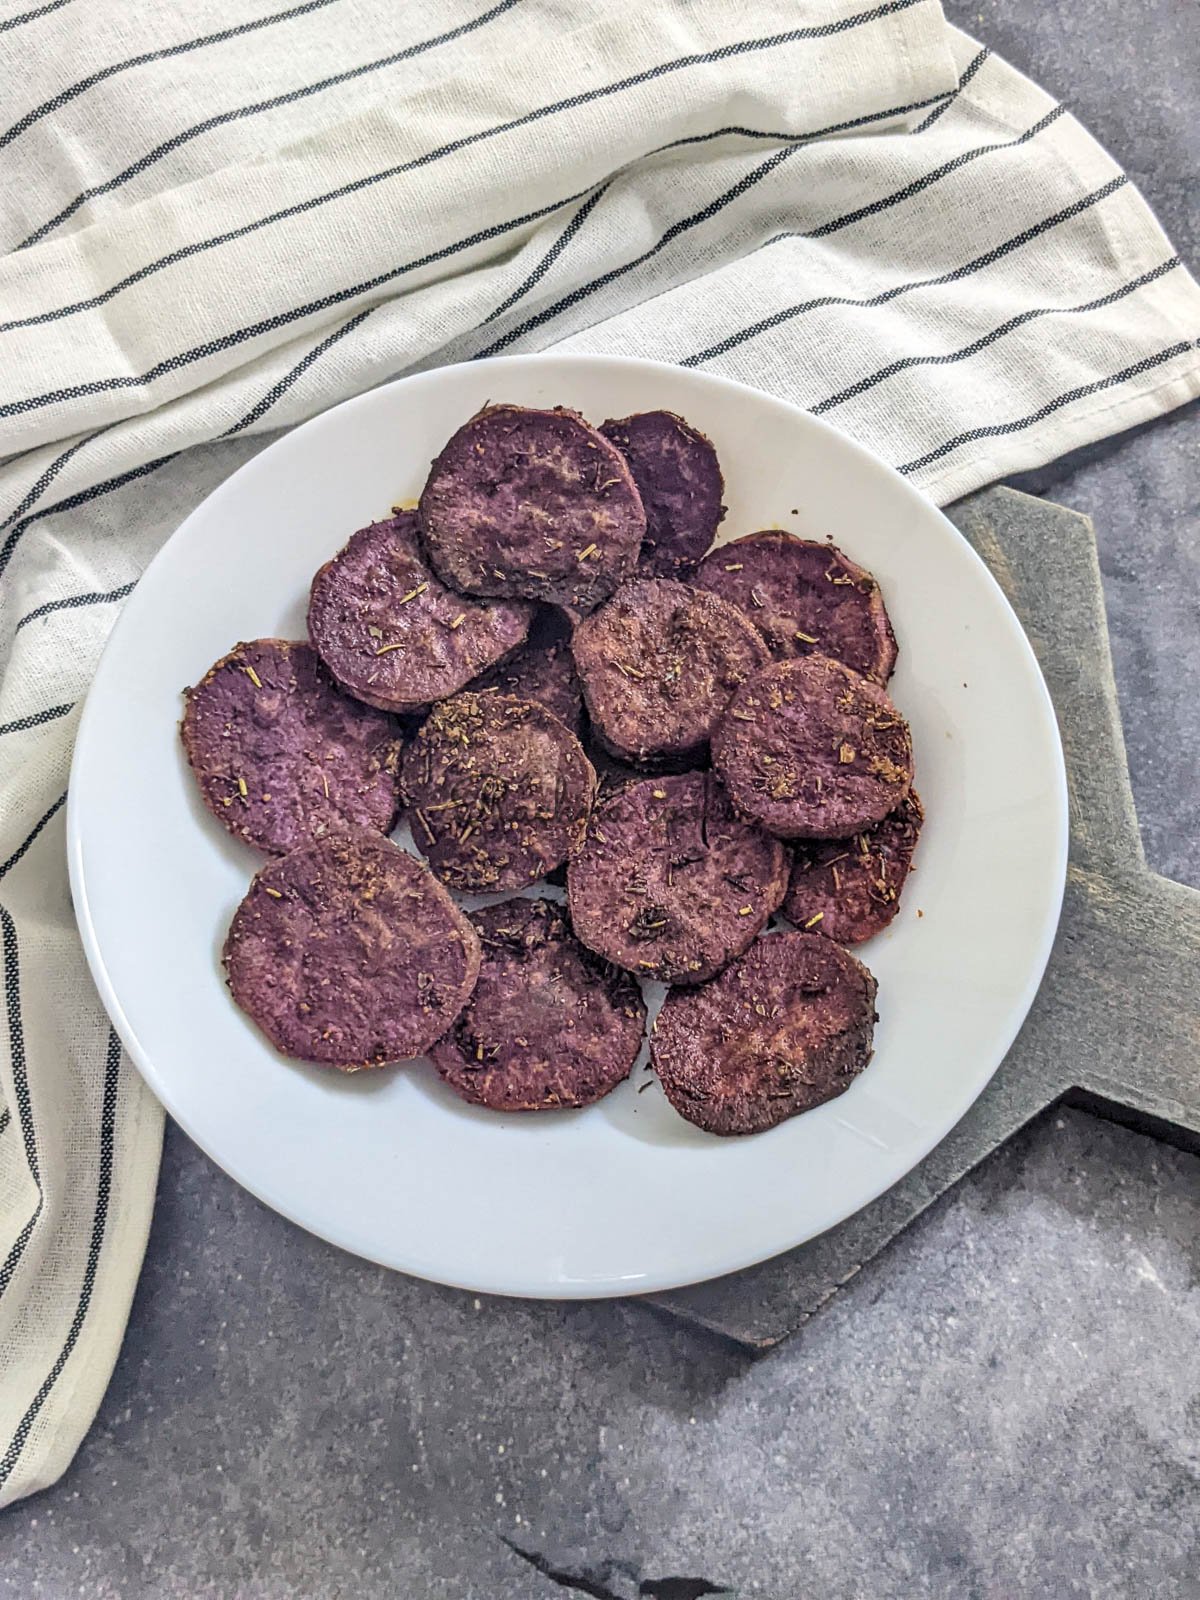 Medium sliced purple sweet potato marinated in seasoning and air fried, served on a white plate with a grey background and a napkin visible.